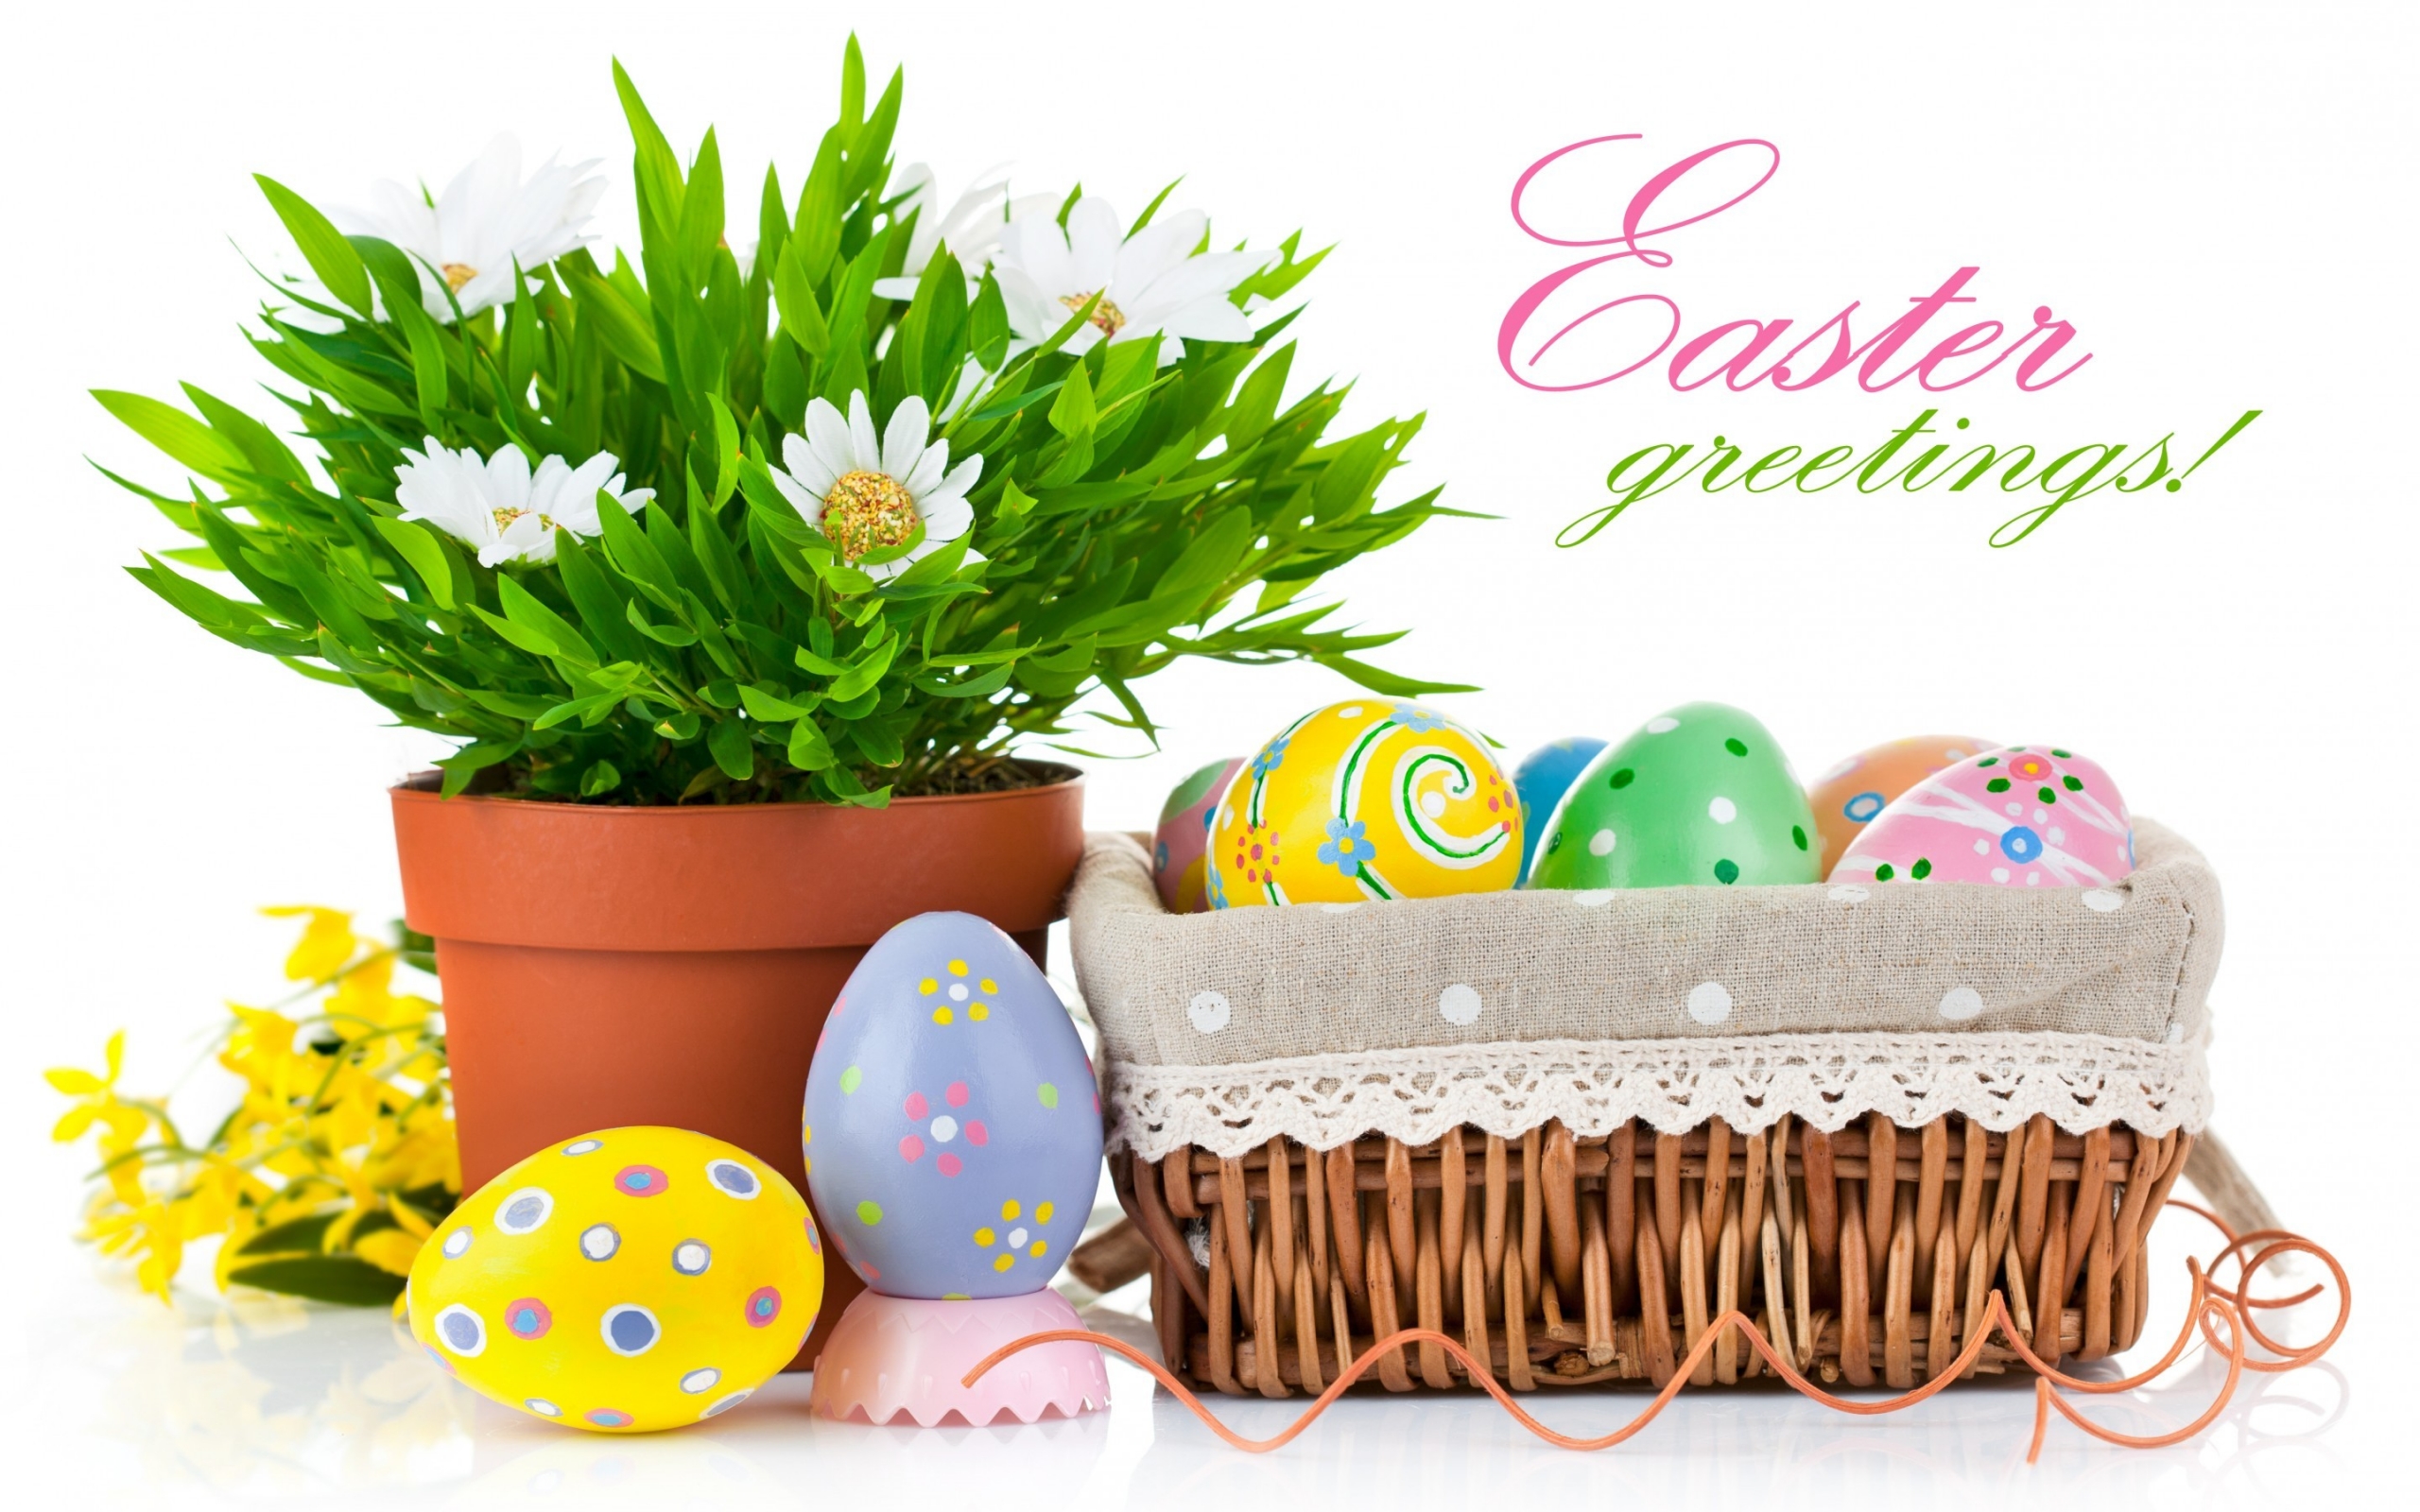 Easter Greetings for 2560 x 1600 widescreen resolution